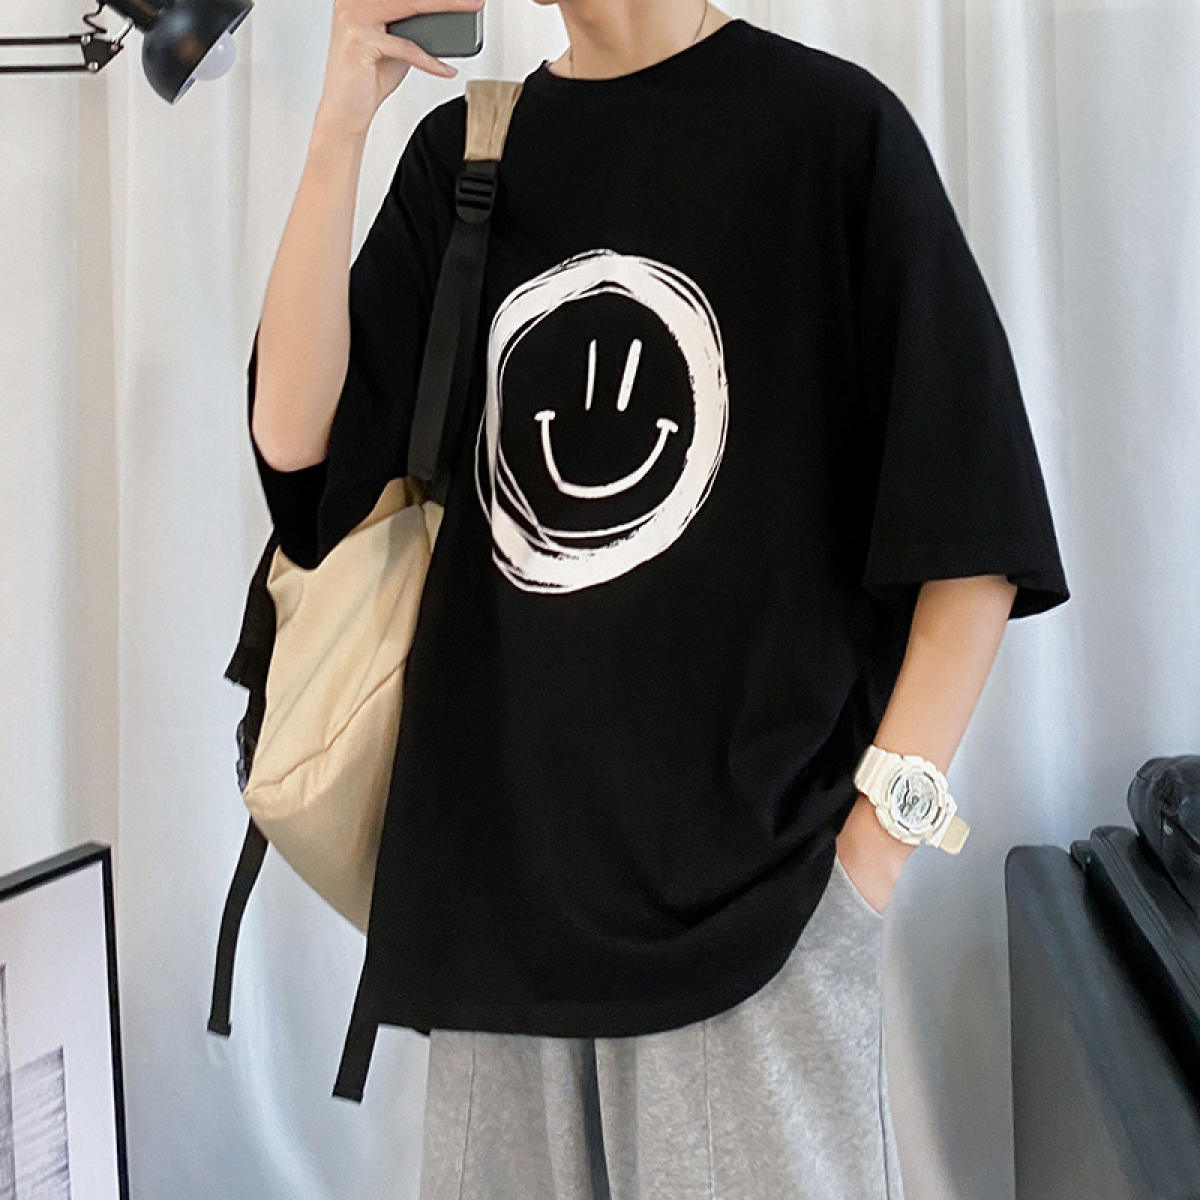 5 Creative Ways To Style Oversized T-shirts: From Casual